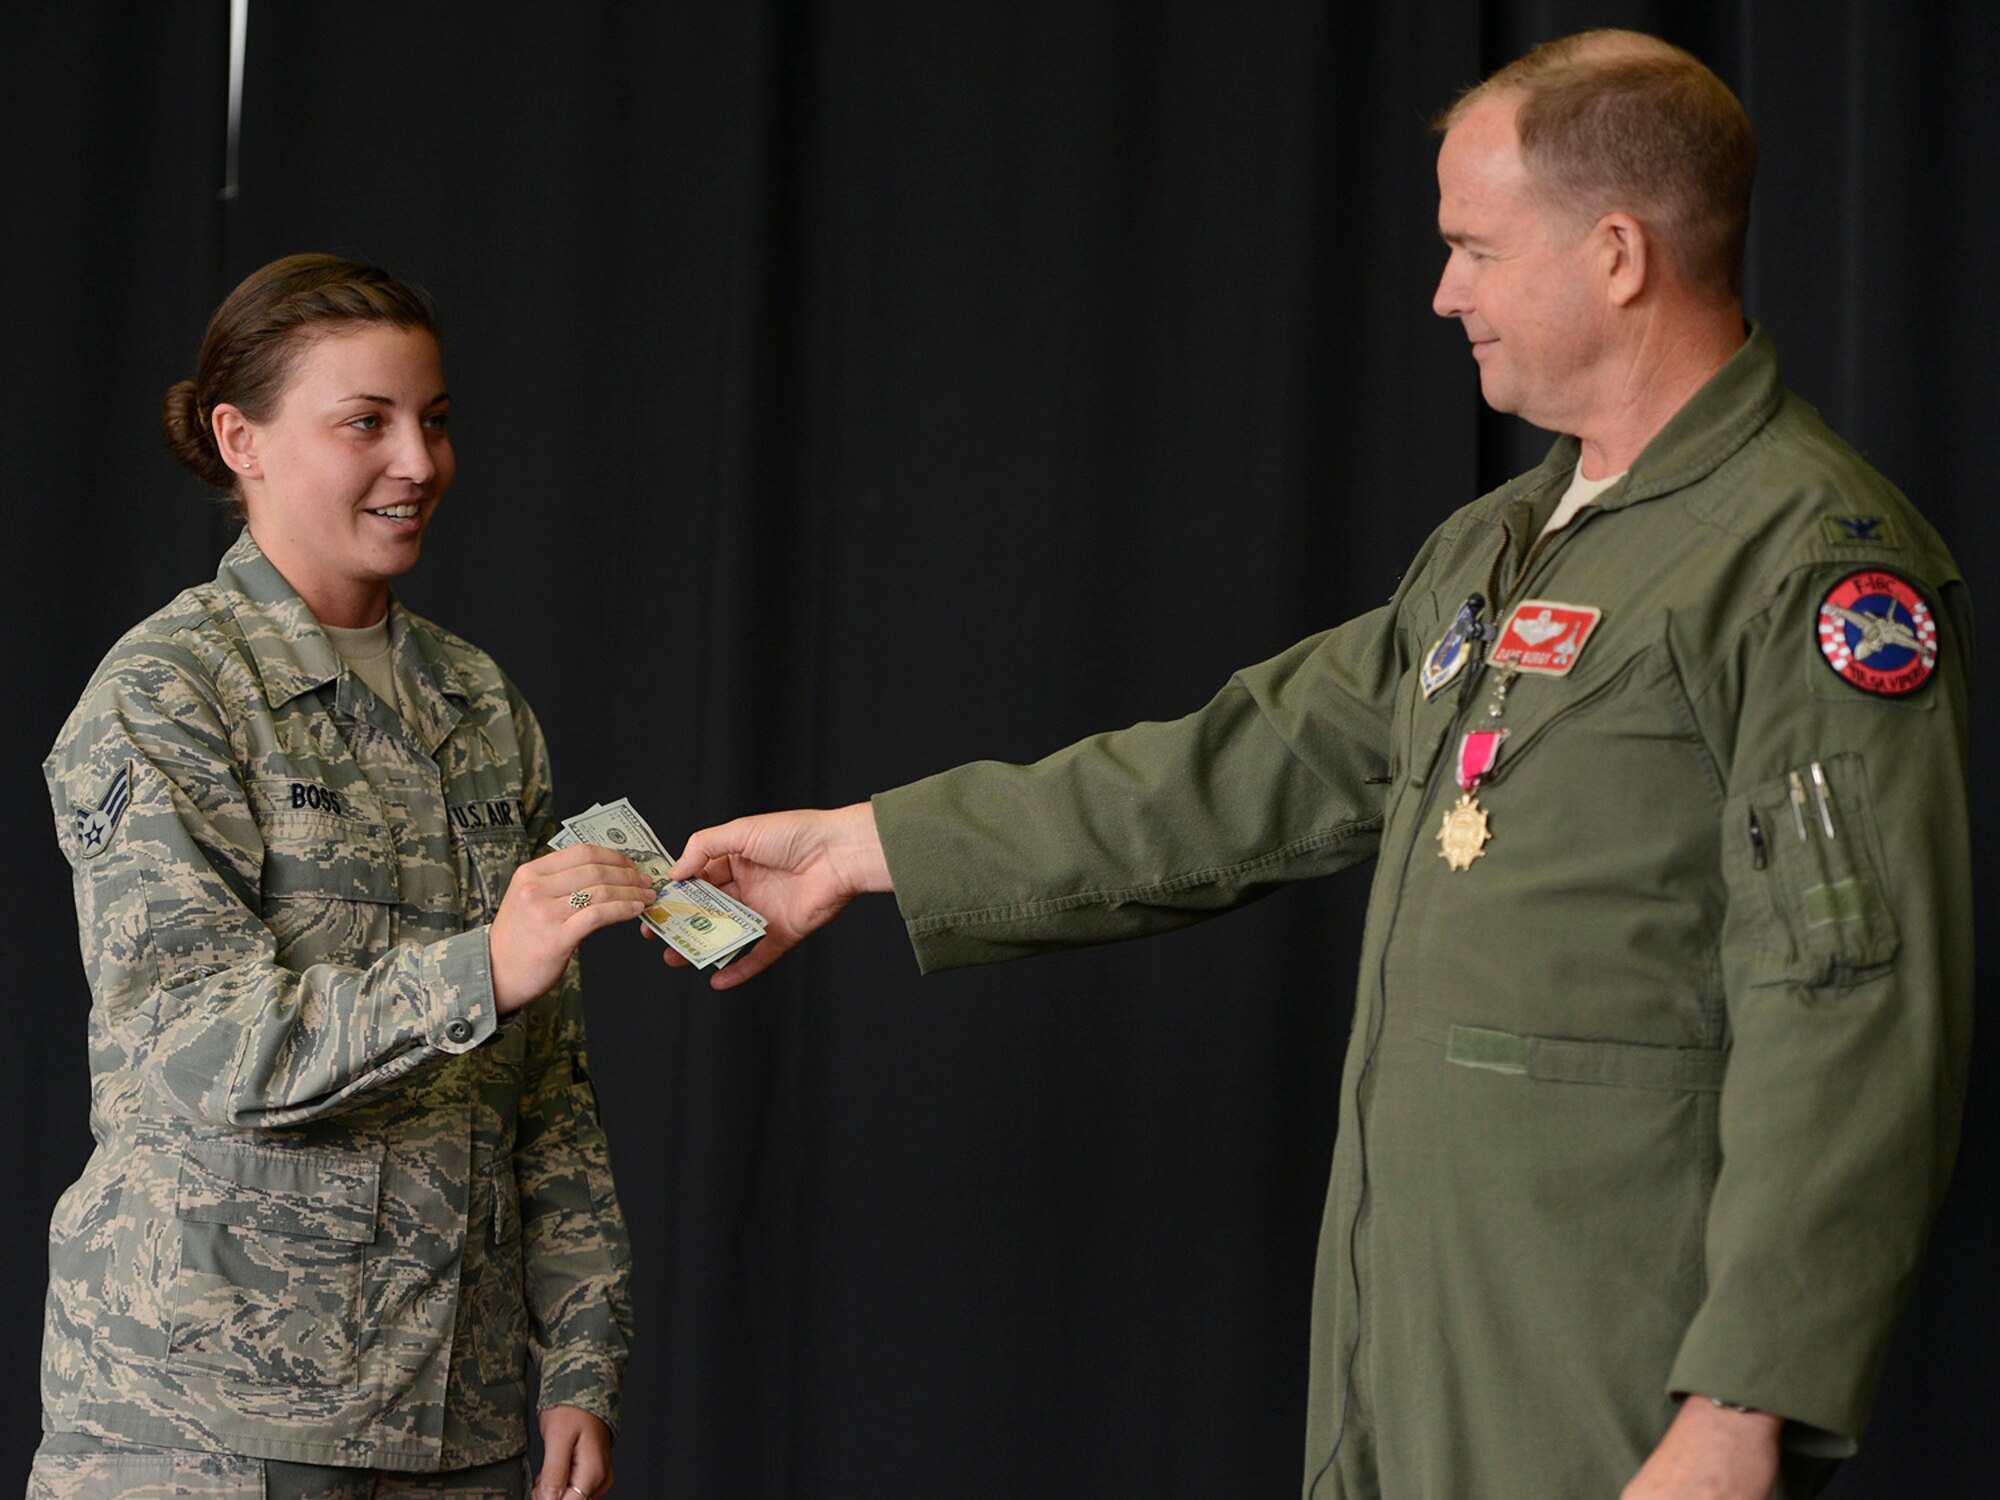 During a Commanders Call at the Tulsa Air National Guard base, June 8, 2014.  Colonel David B. Burgy, 138th Fighter Wing Commander,  presents two, one hundred dollar bills to Senior Airman Hannah Boss for her recruiting efforts.   Burgy regularly issues the recruiting challenge to members of the 138th and includes the monetary award as incentive.   (U.S. National Guard photo by Master Sgt.  Mark A. Moore/Released)